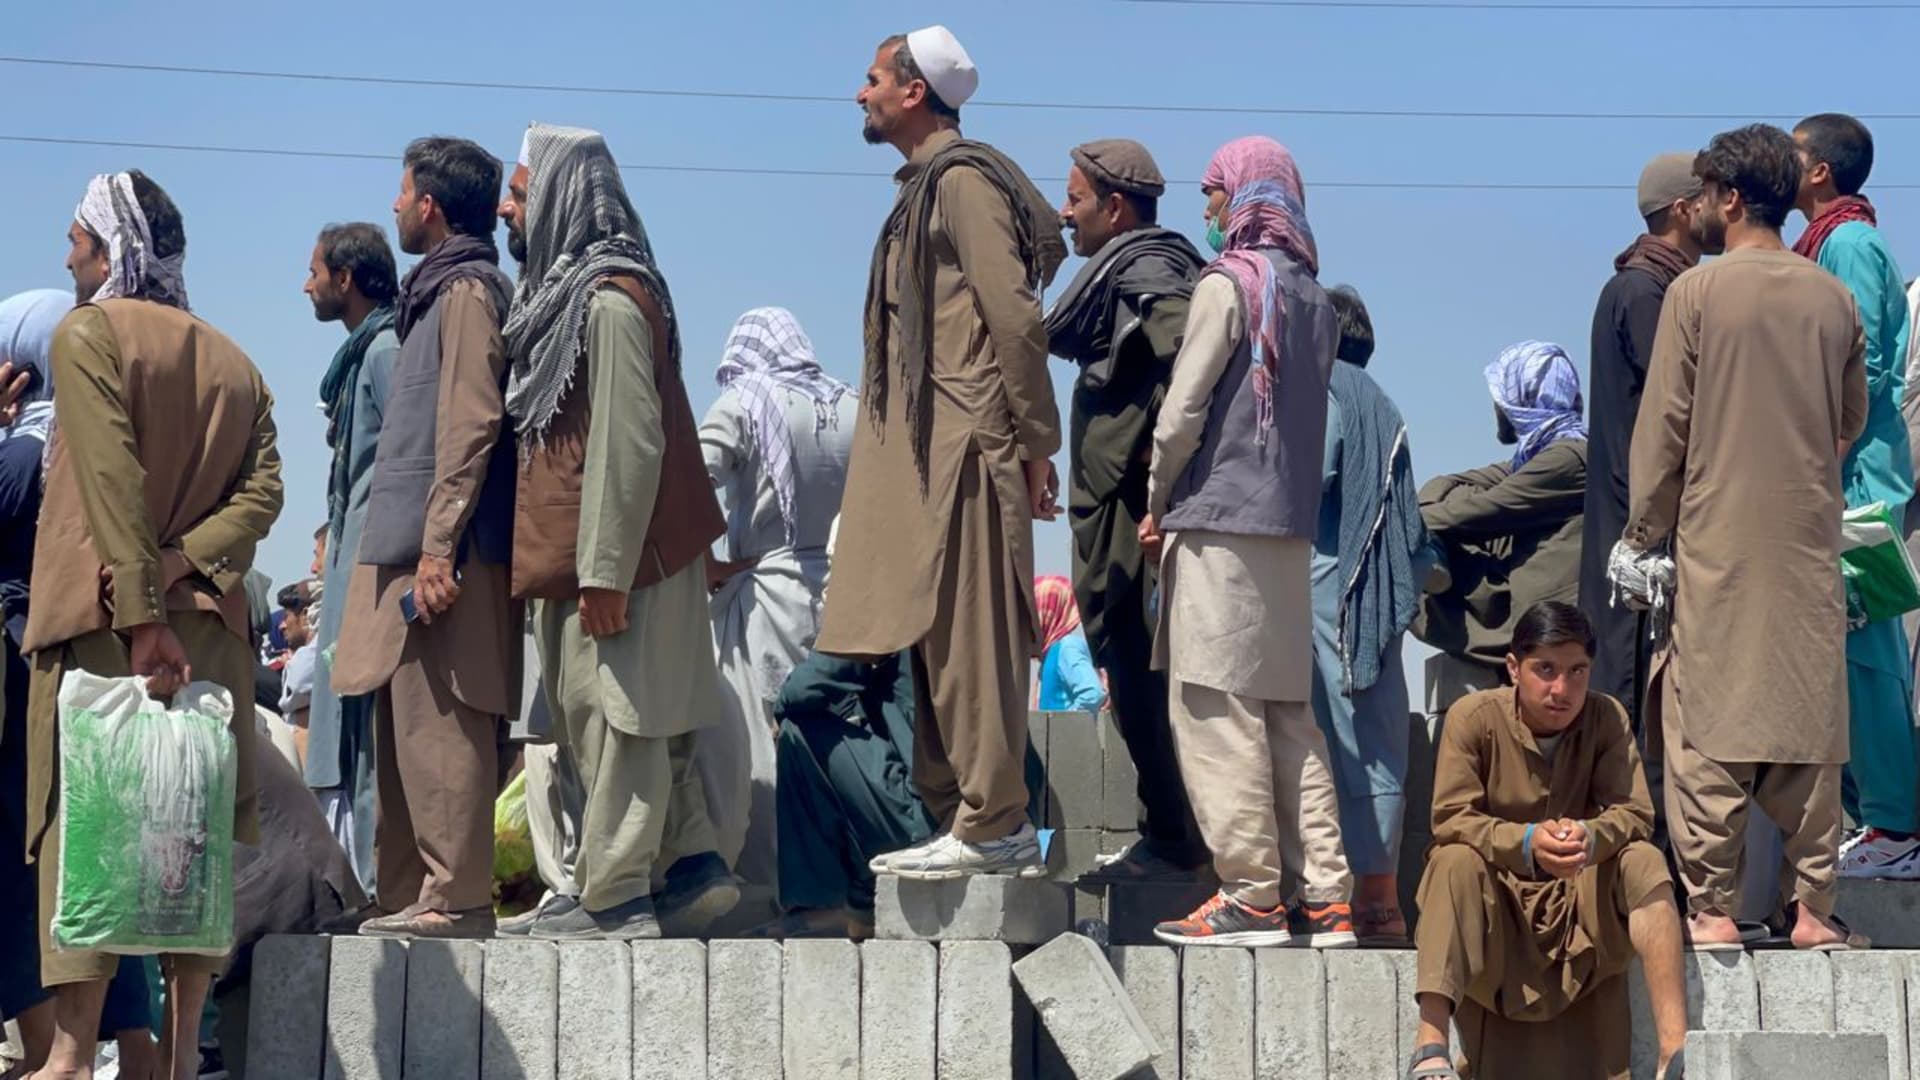 Afghan people who want to leave the country continue to wait around Hamid Karzai International Airport in Kabul, Afghanistan on August 26, 2021.